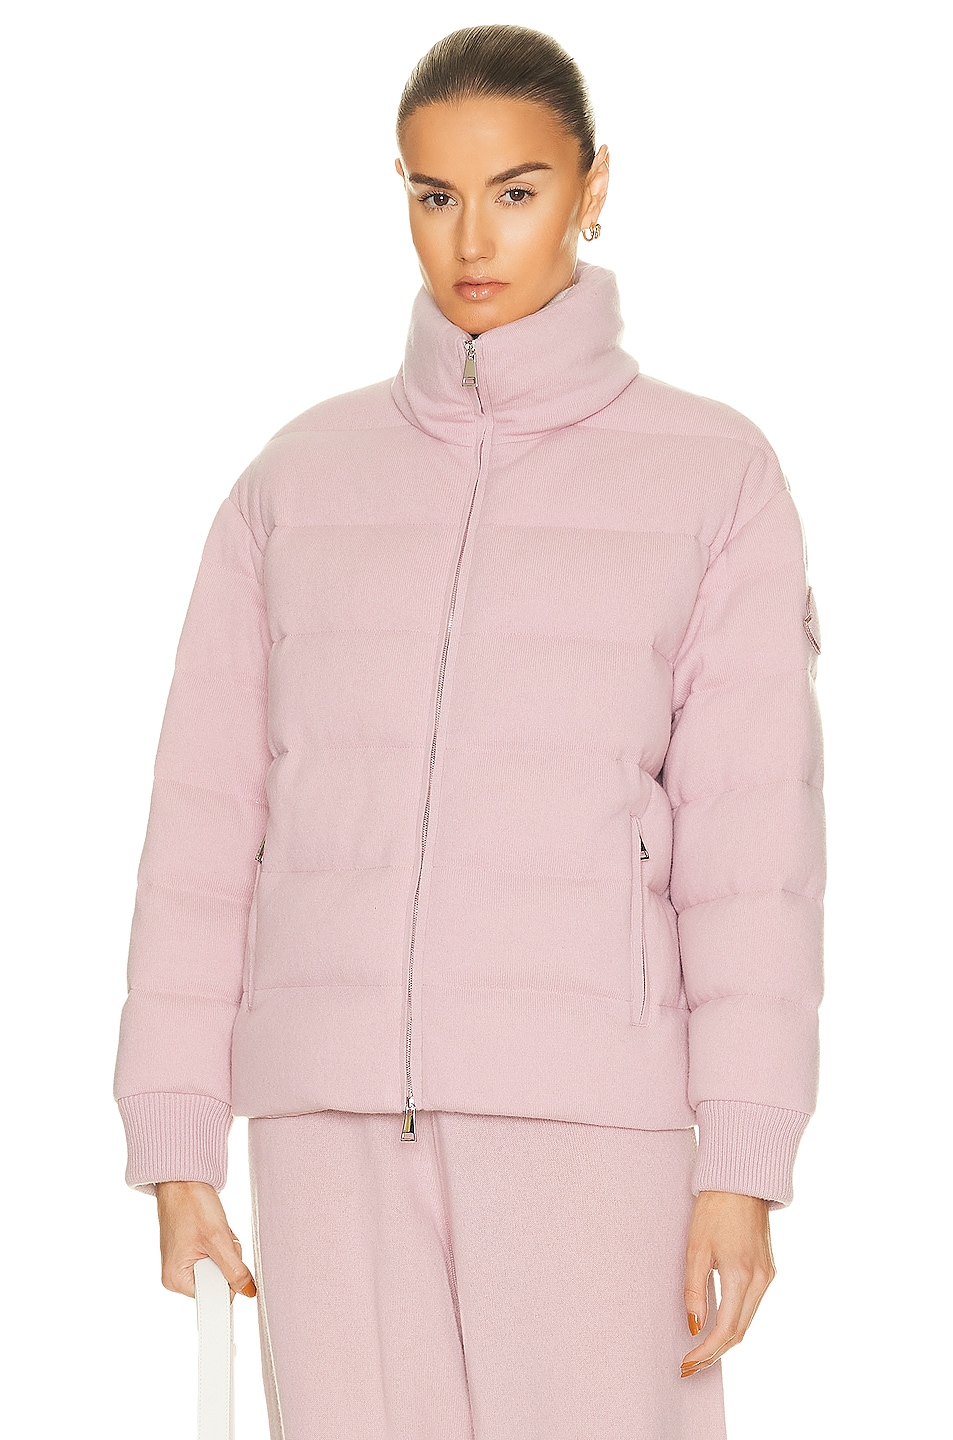 Moncler Cayeux Cashmere Jacket in Pink | FWRD